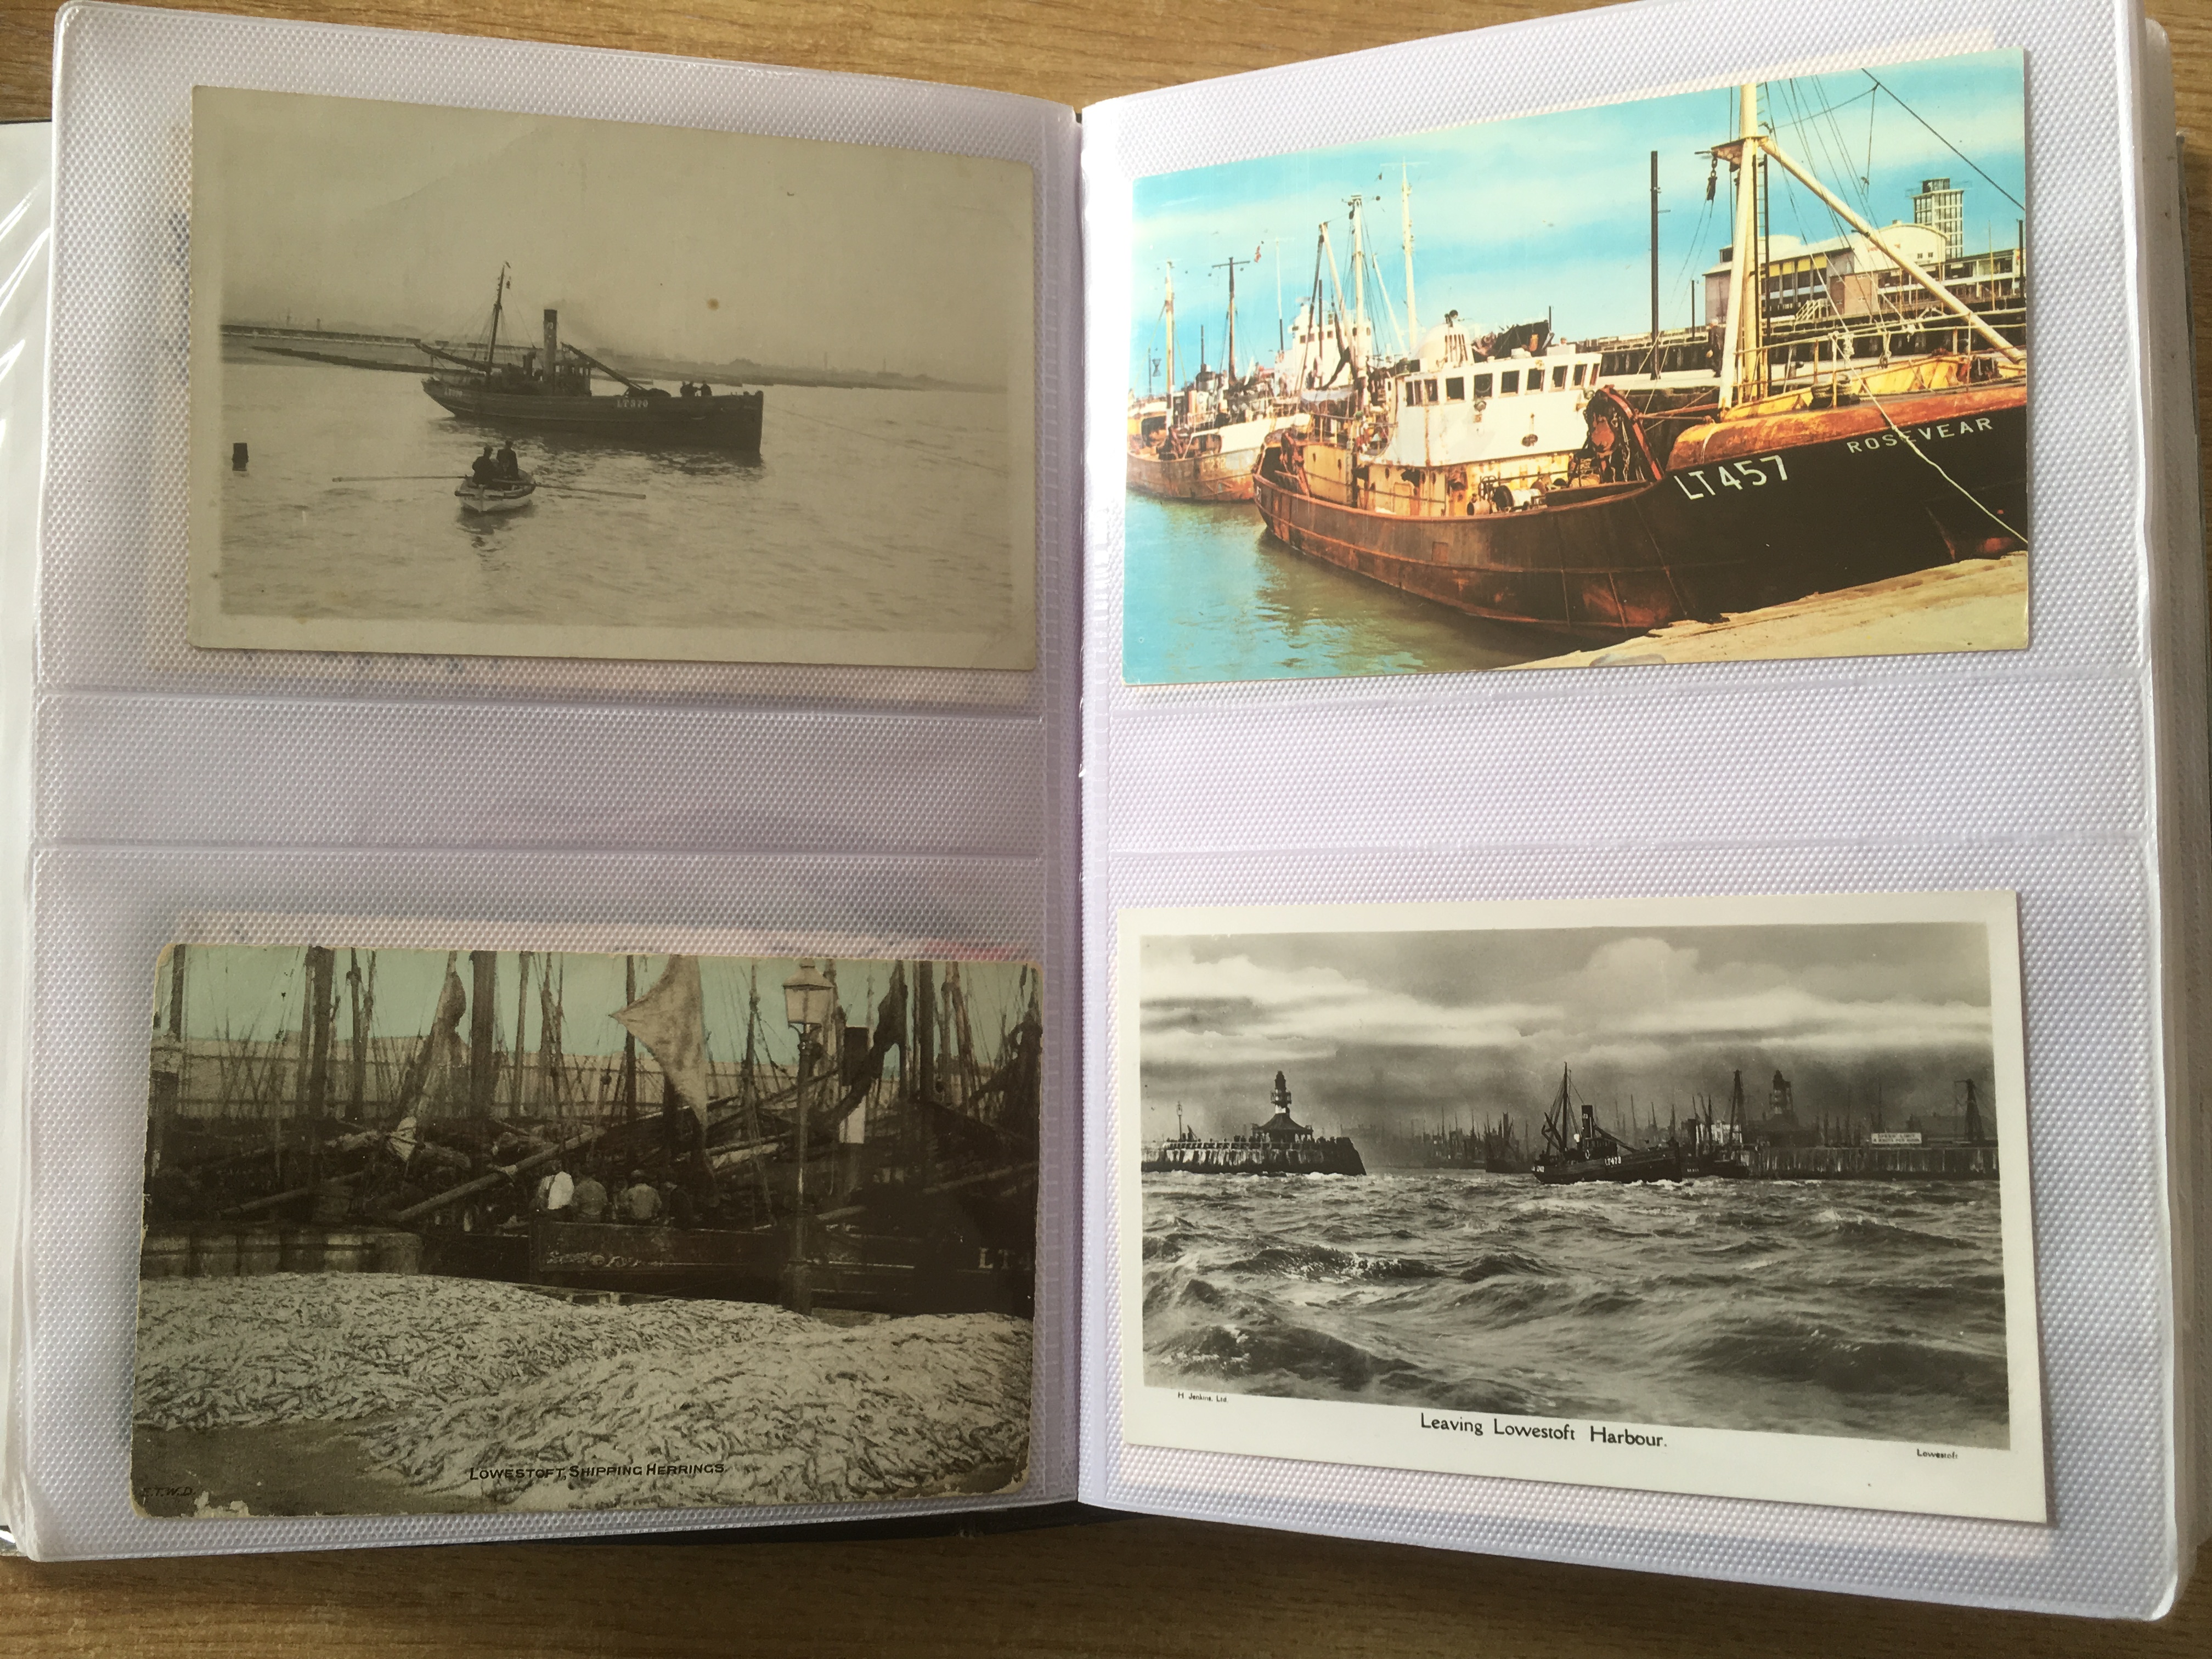 SUFFOLK: ALBUM WITH A COLLECTION OF LOWESTOFT FISHING INDUSTRY POSTCARDS, HARBOUR, TRAWLERS, - Image 5 of 7